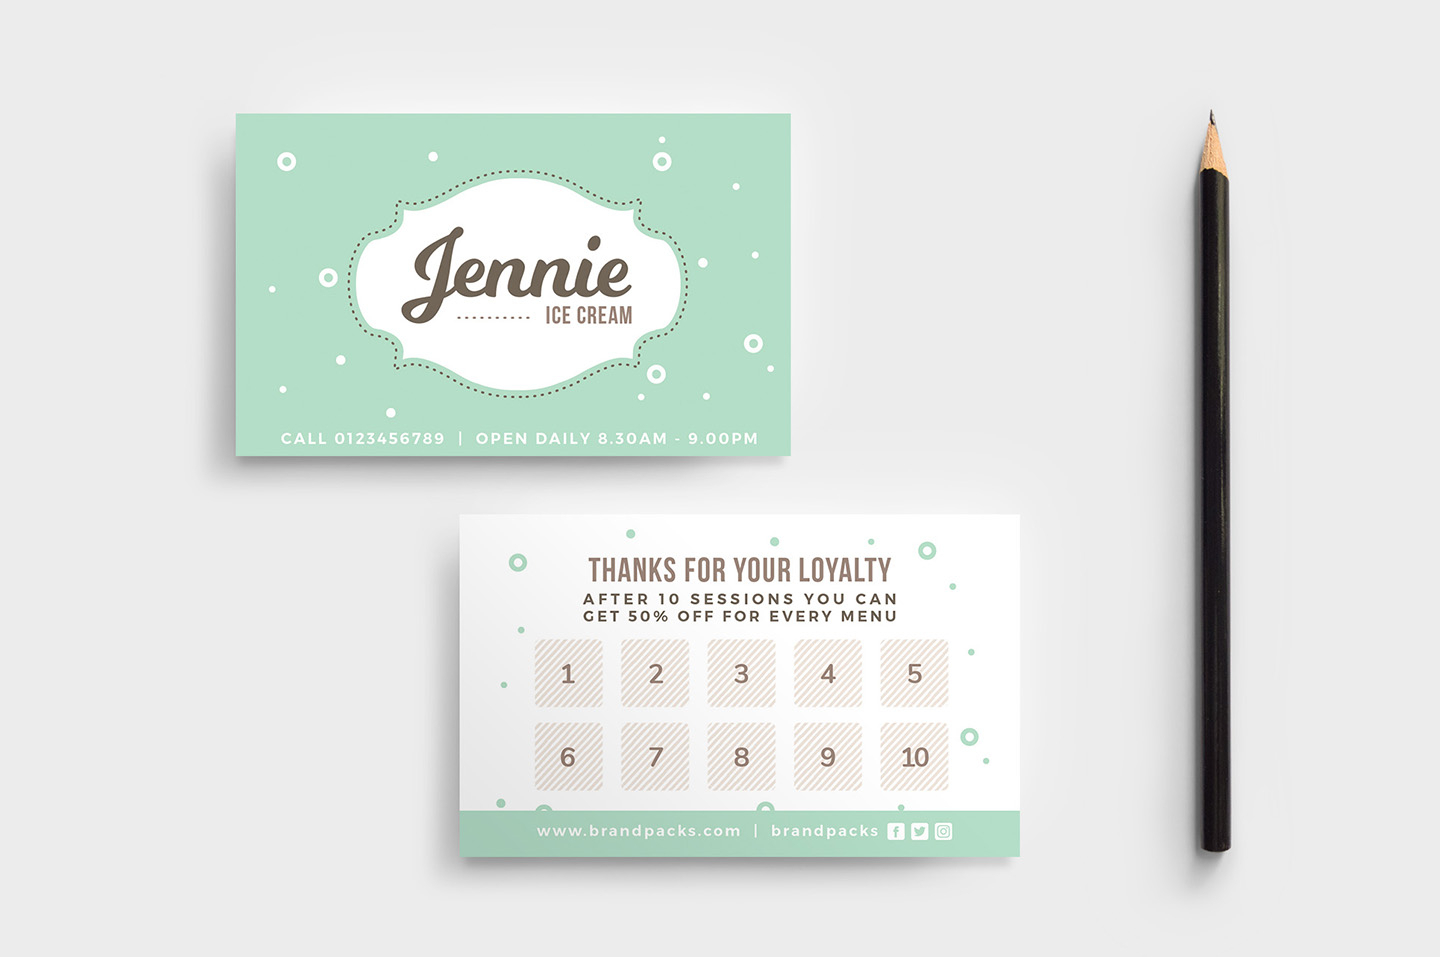 Free Loyalty Card Templates - Psd, Ai & Vector - Brandpacks Intended For Customer Loyalty Card Template Free